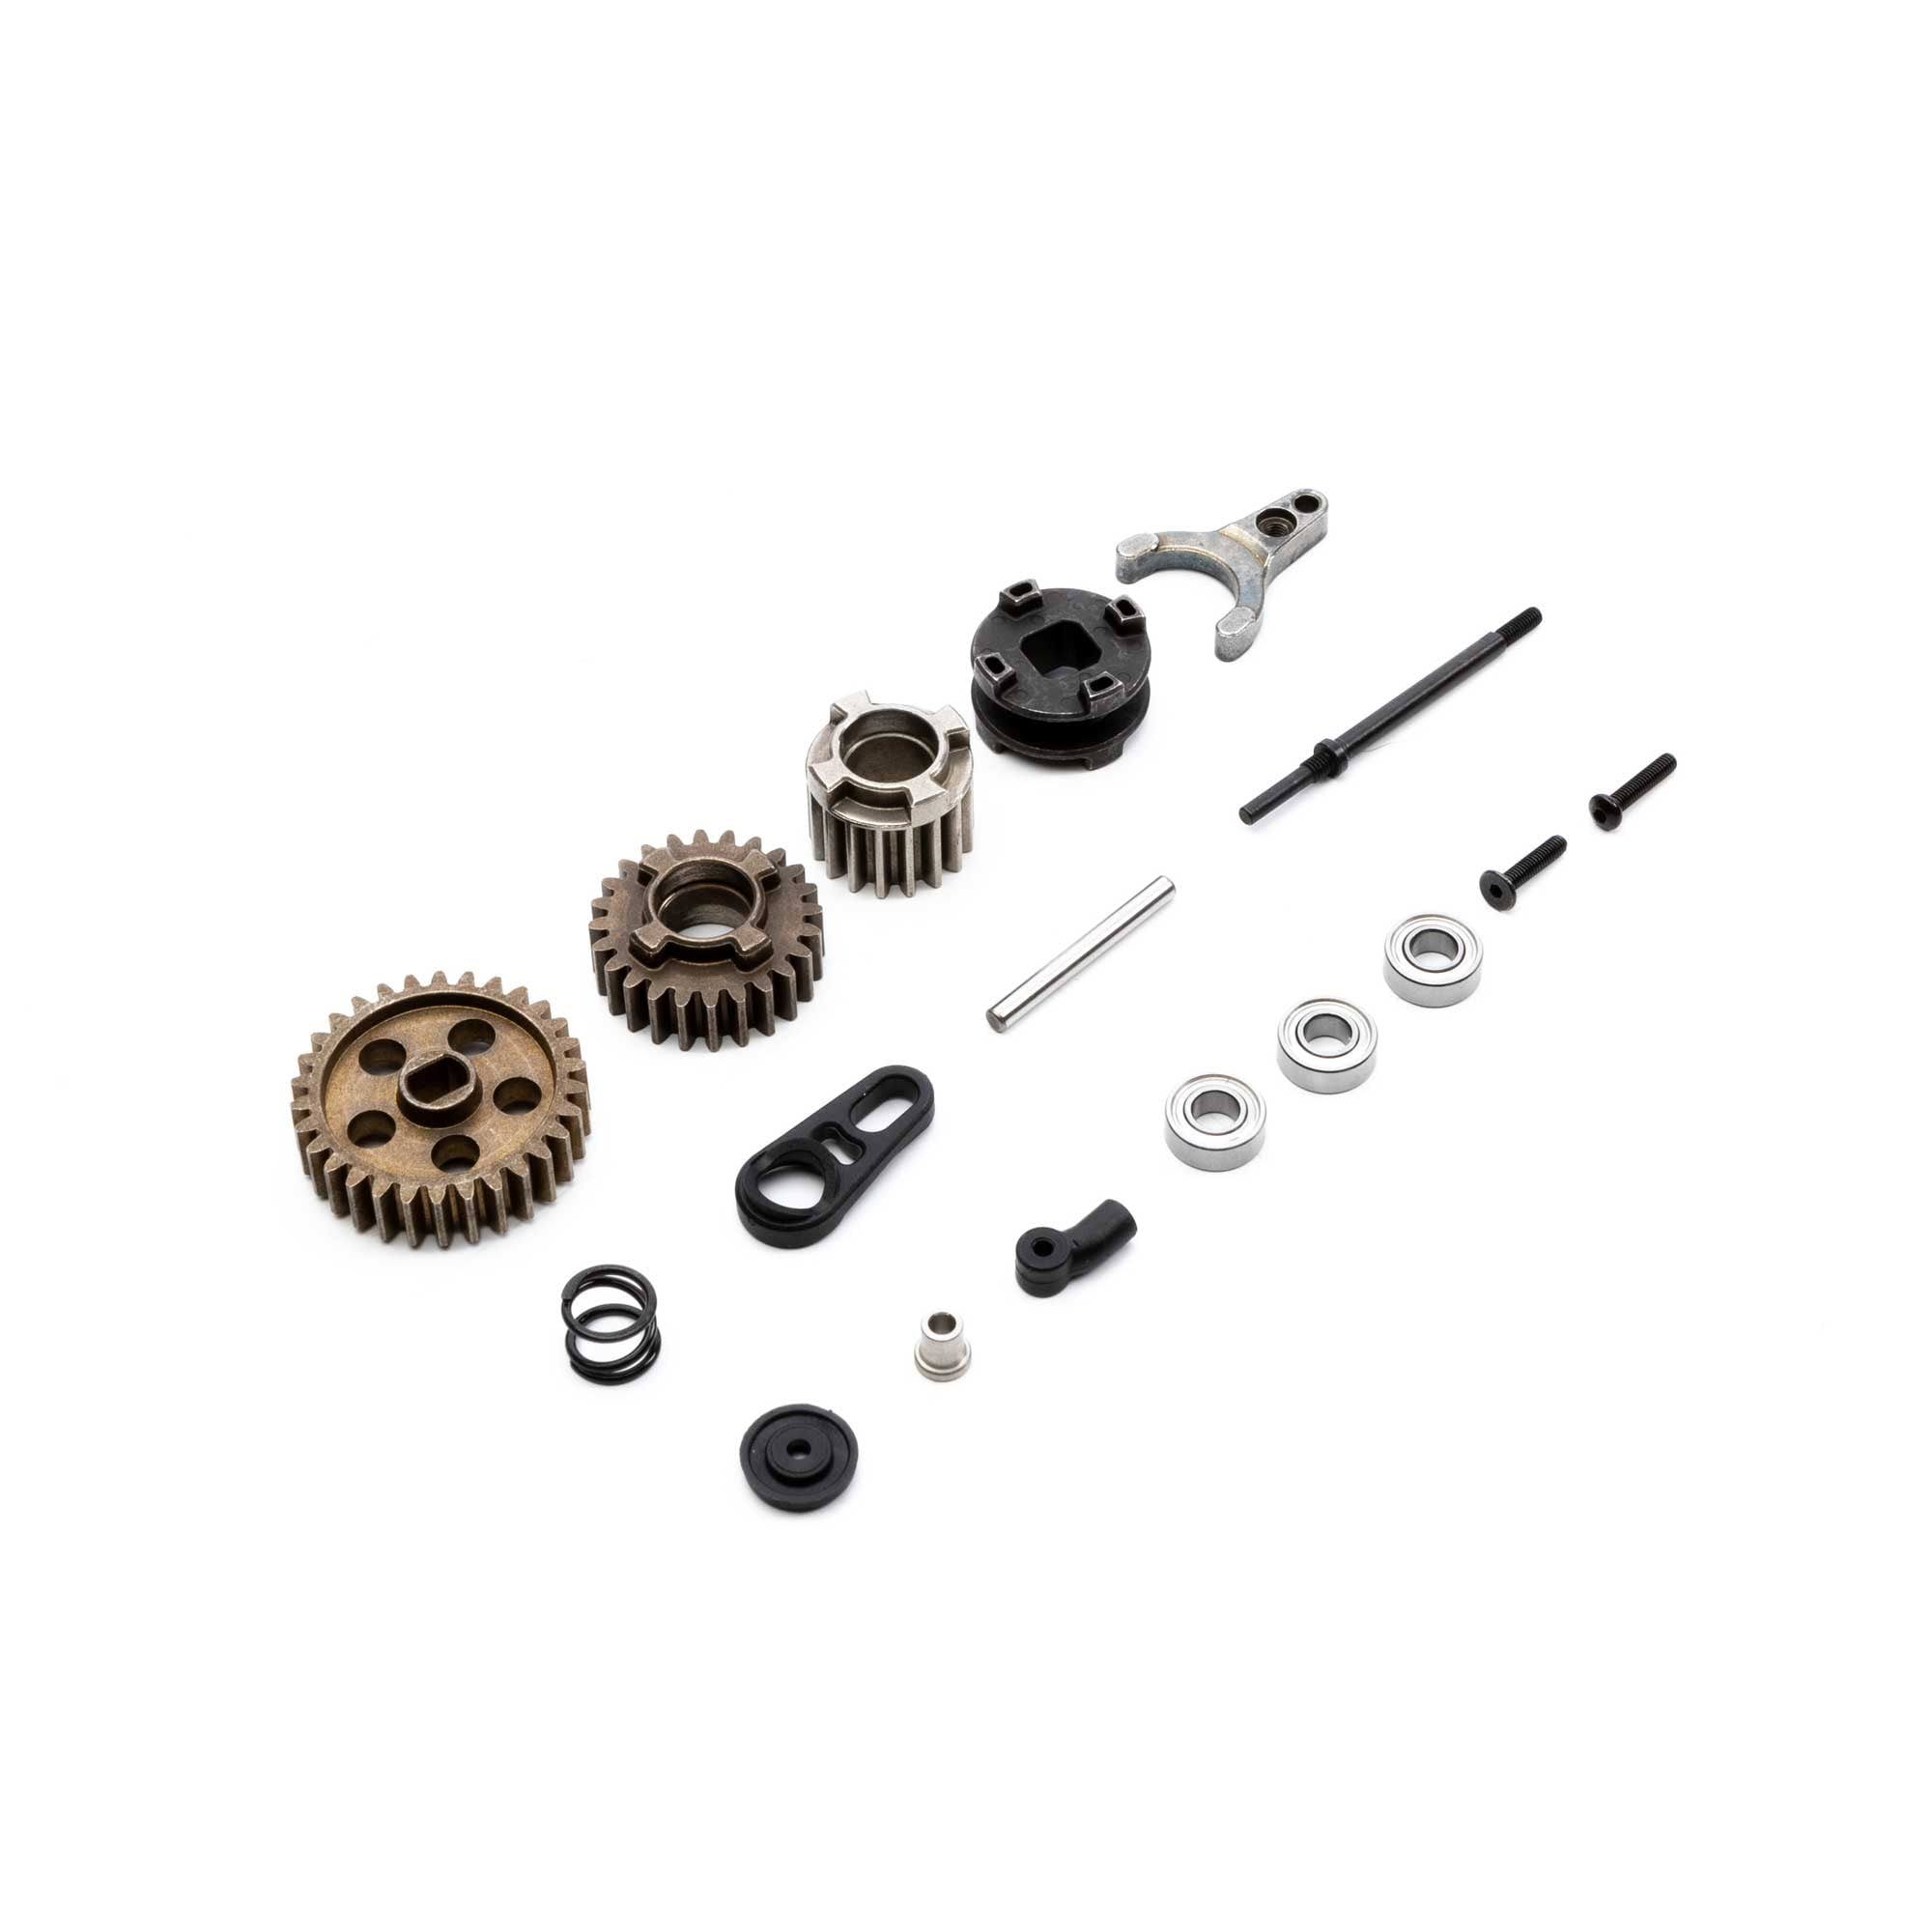 Axial 2-Speed Set RBX10, AXI332005